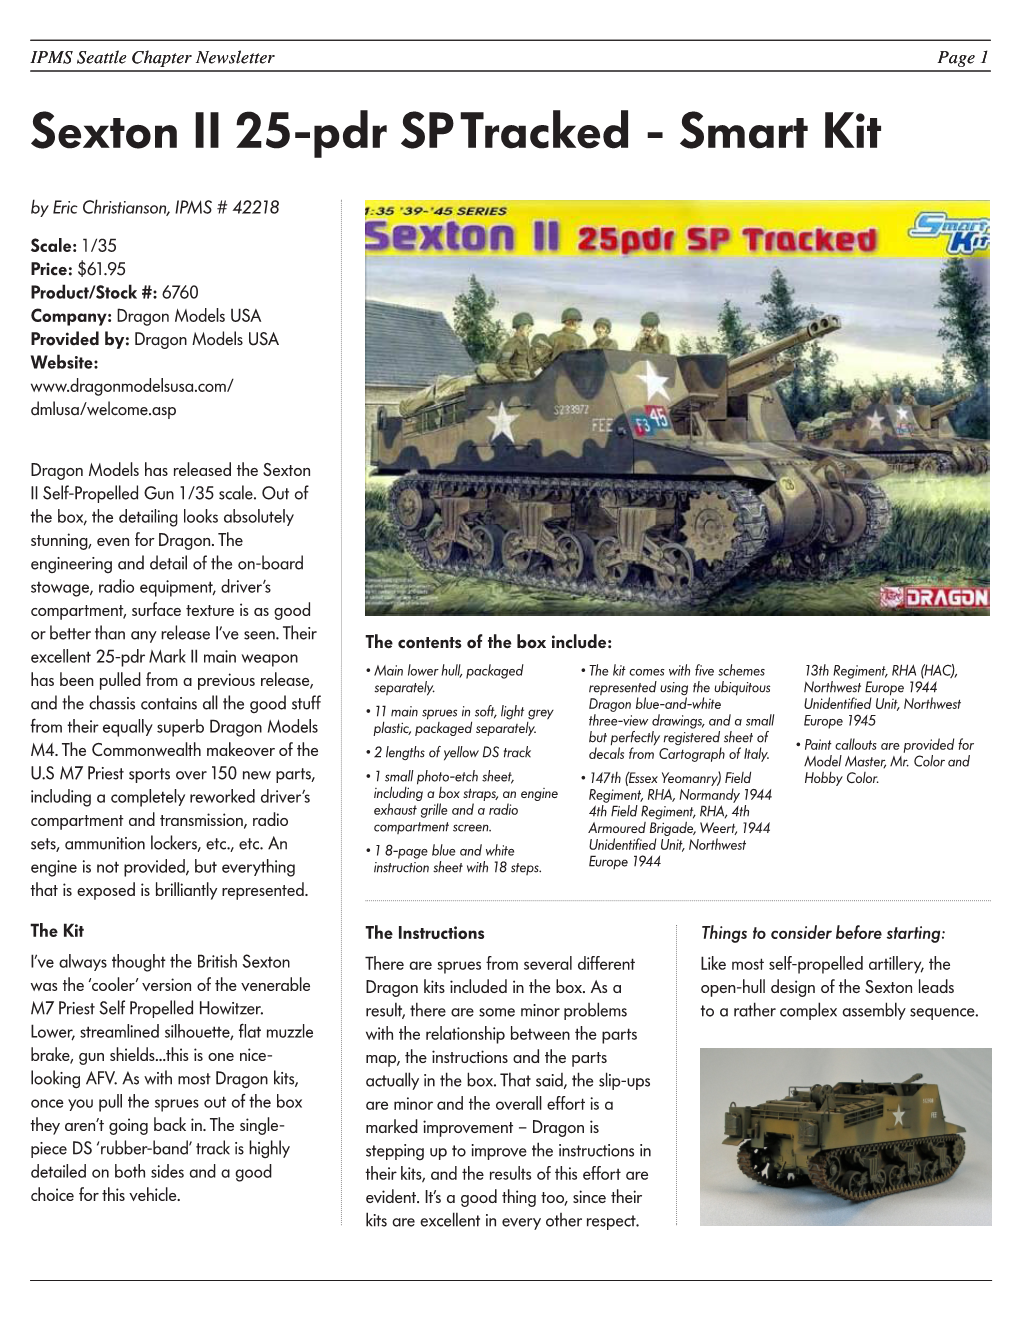 Sexton II 25-Pdr SP Tracked - Smart Kit by Eric Christianson, IPMS # 42218